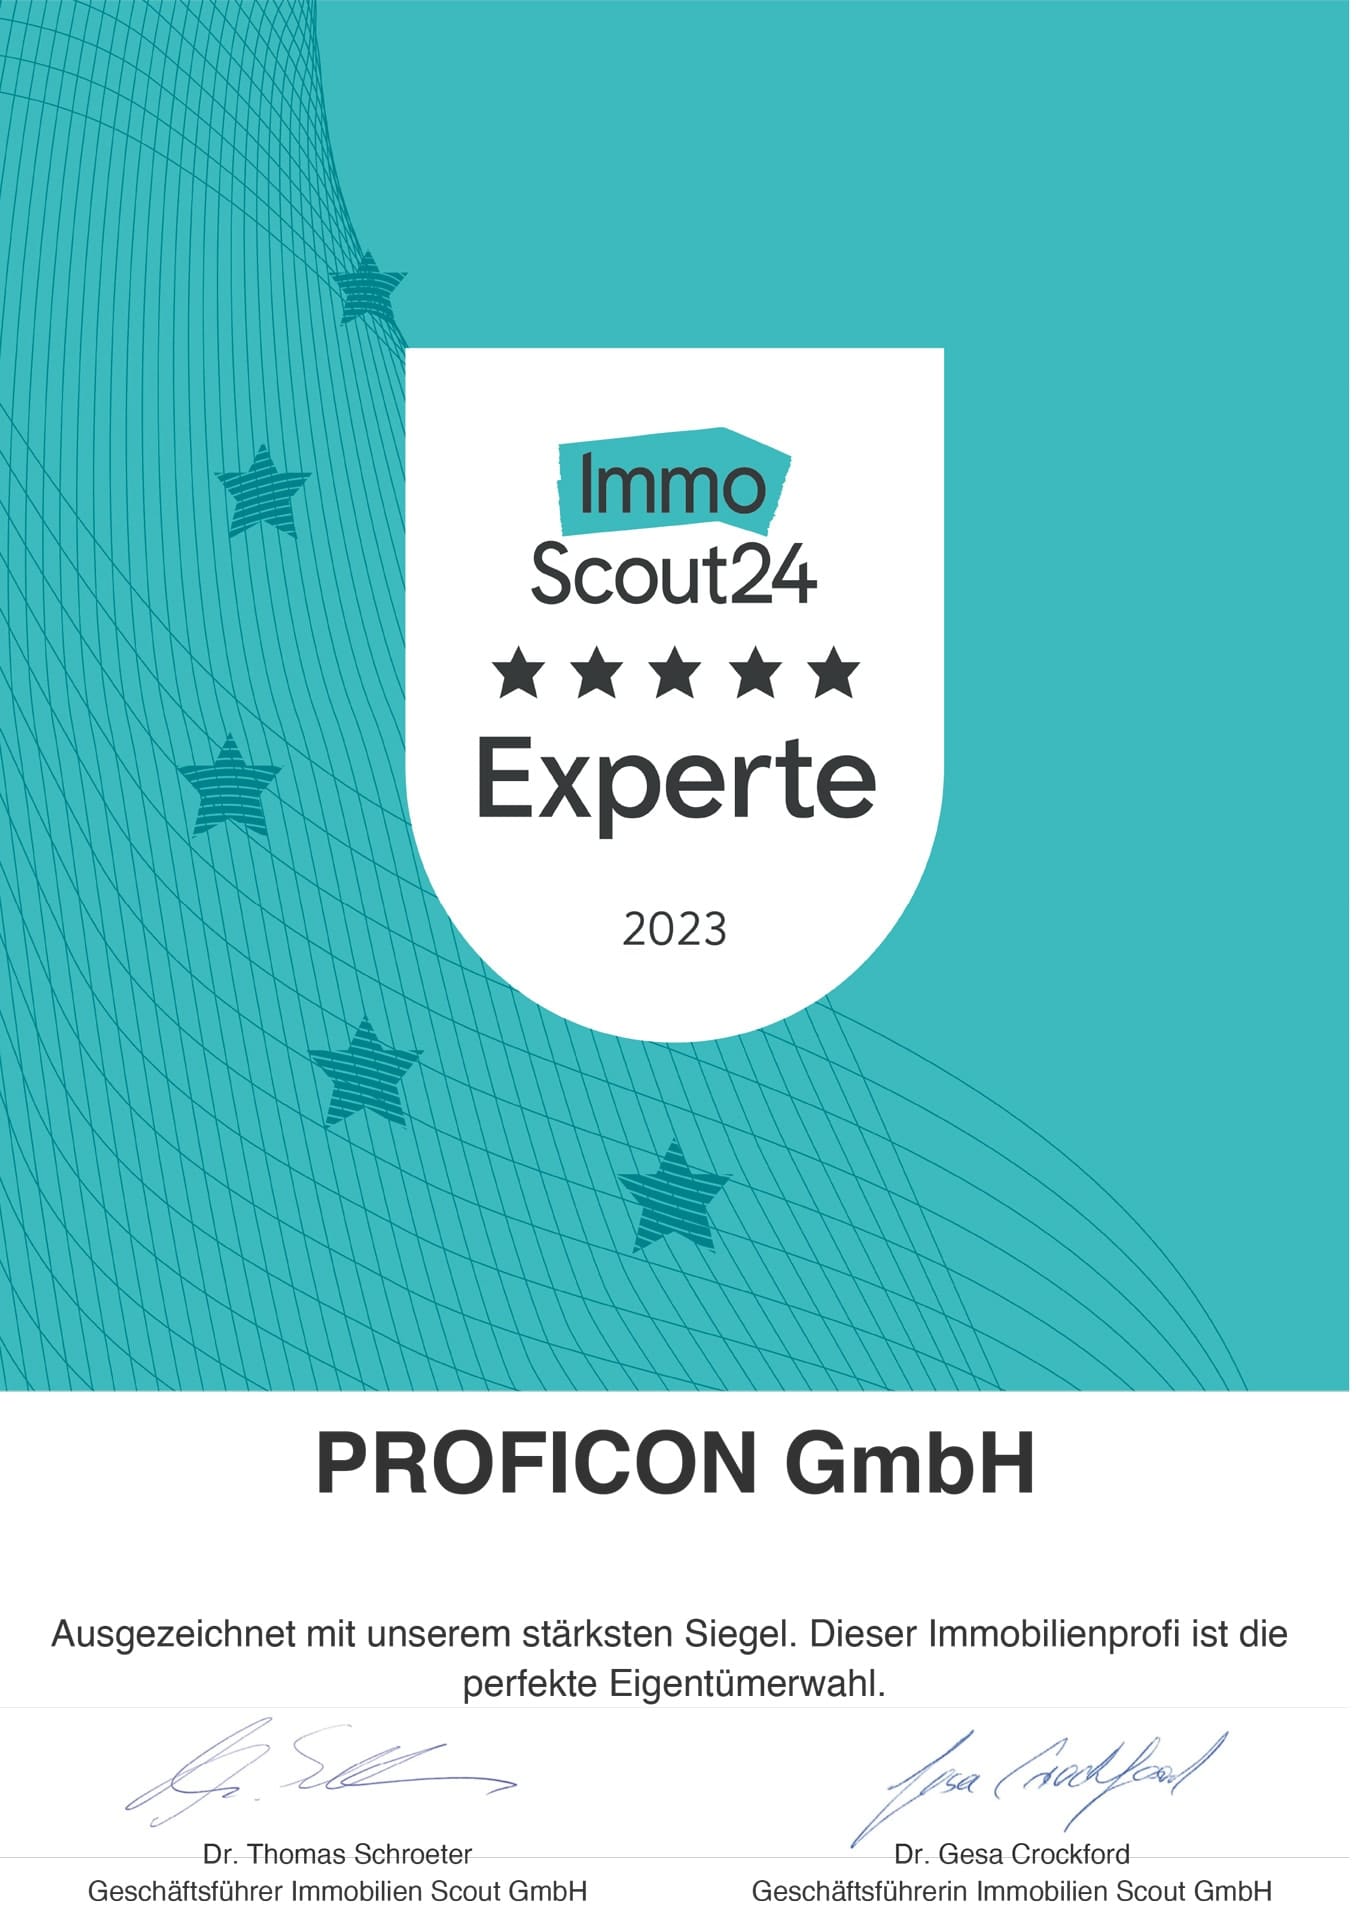 ImmoScout24 Urkunde 2023